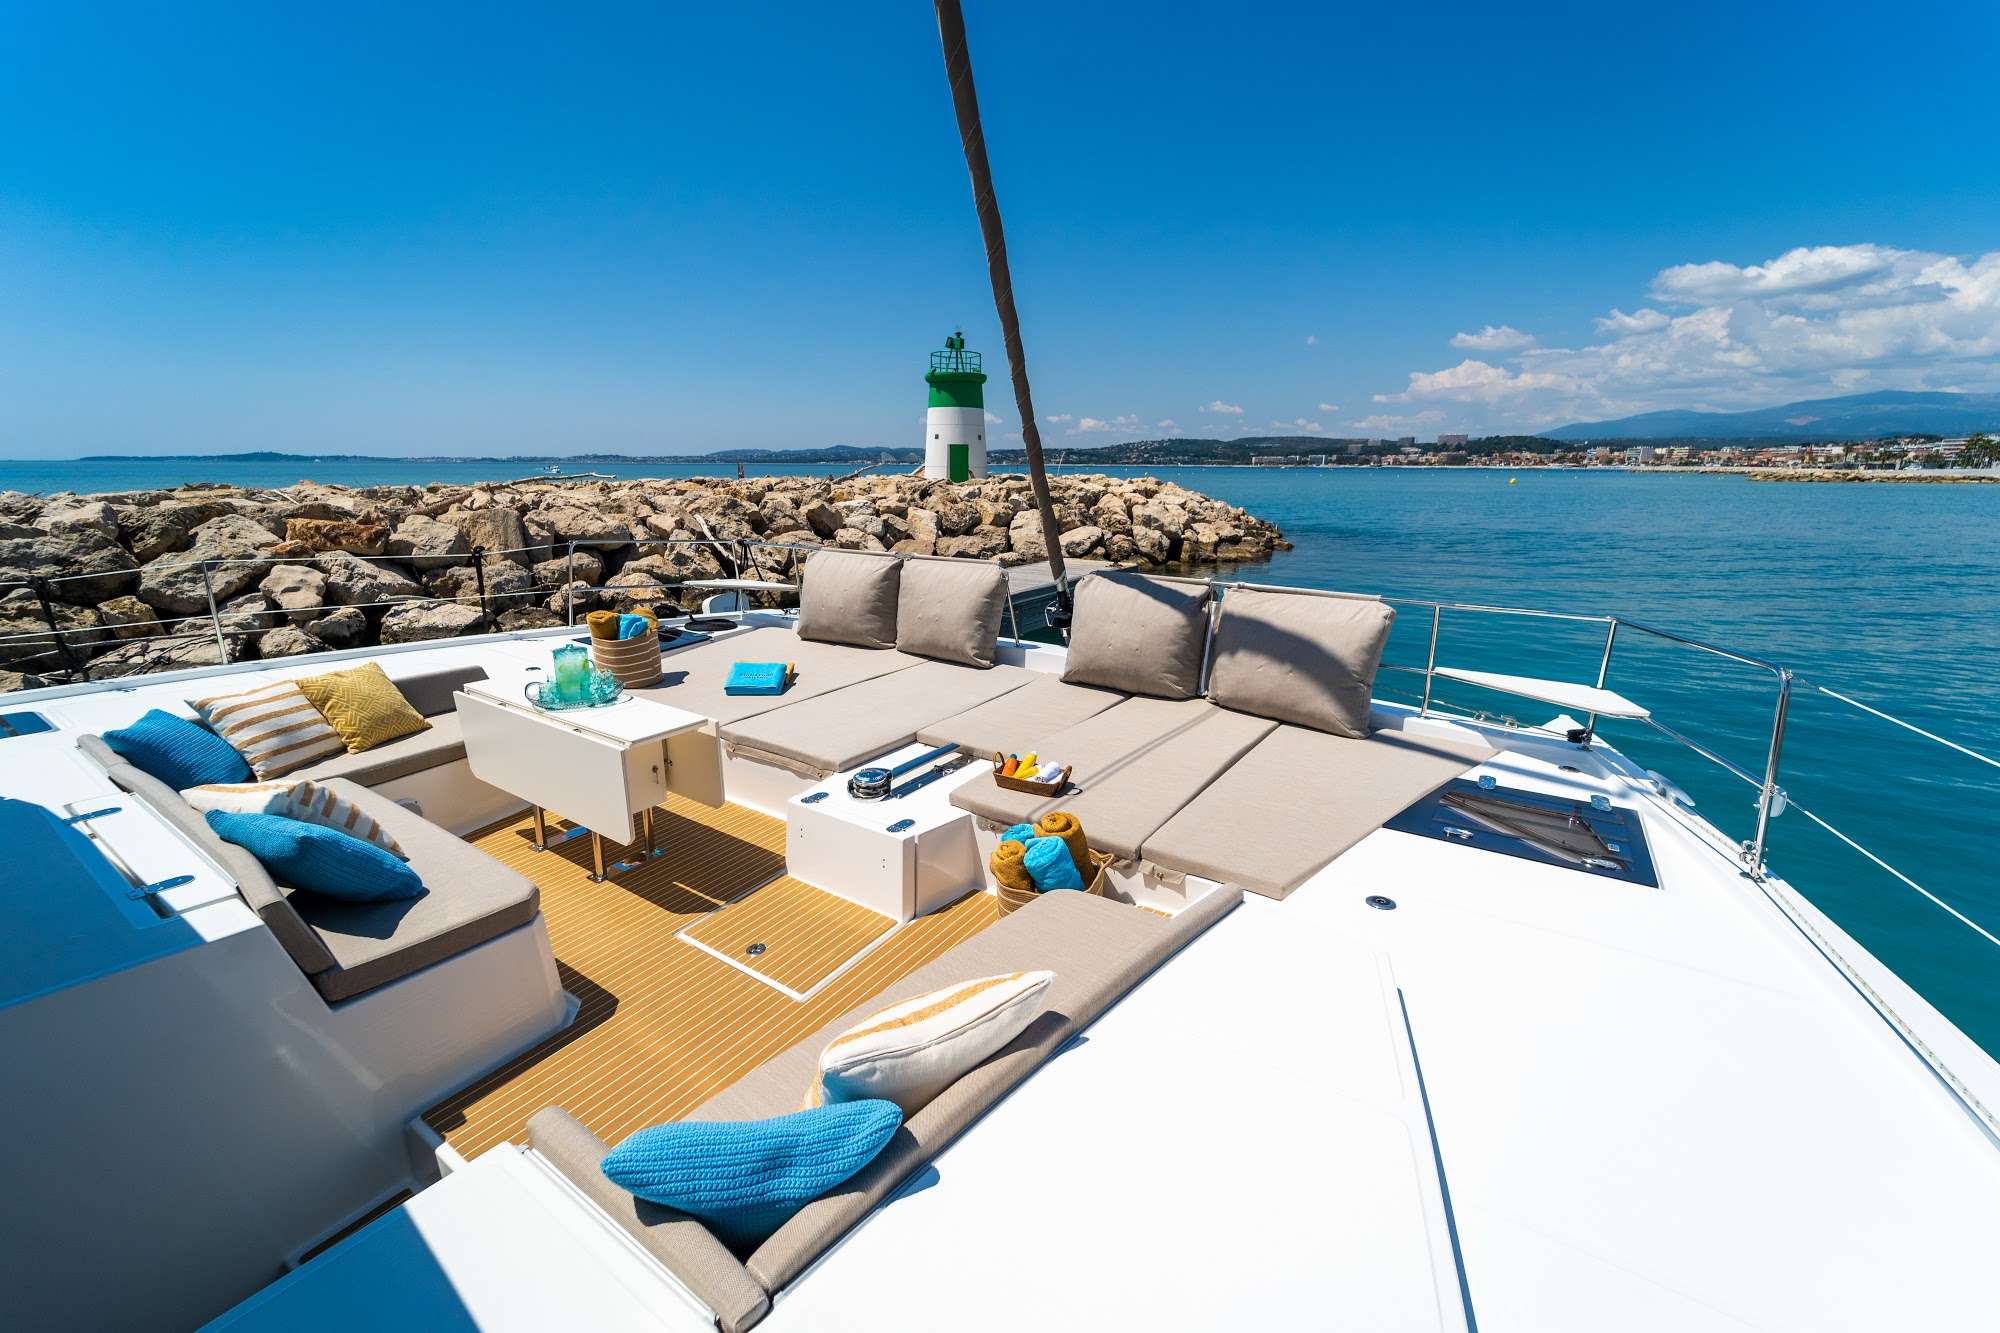 Signature Vision - Yacht Charter Capestang & Boat hire in Europe (Spain, France, Italy) 4